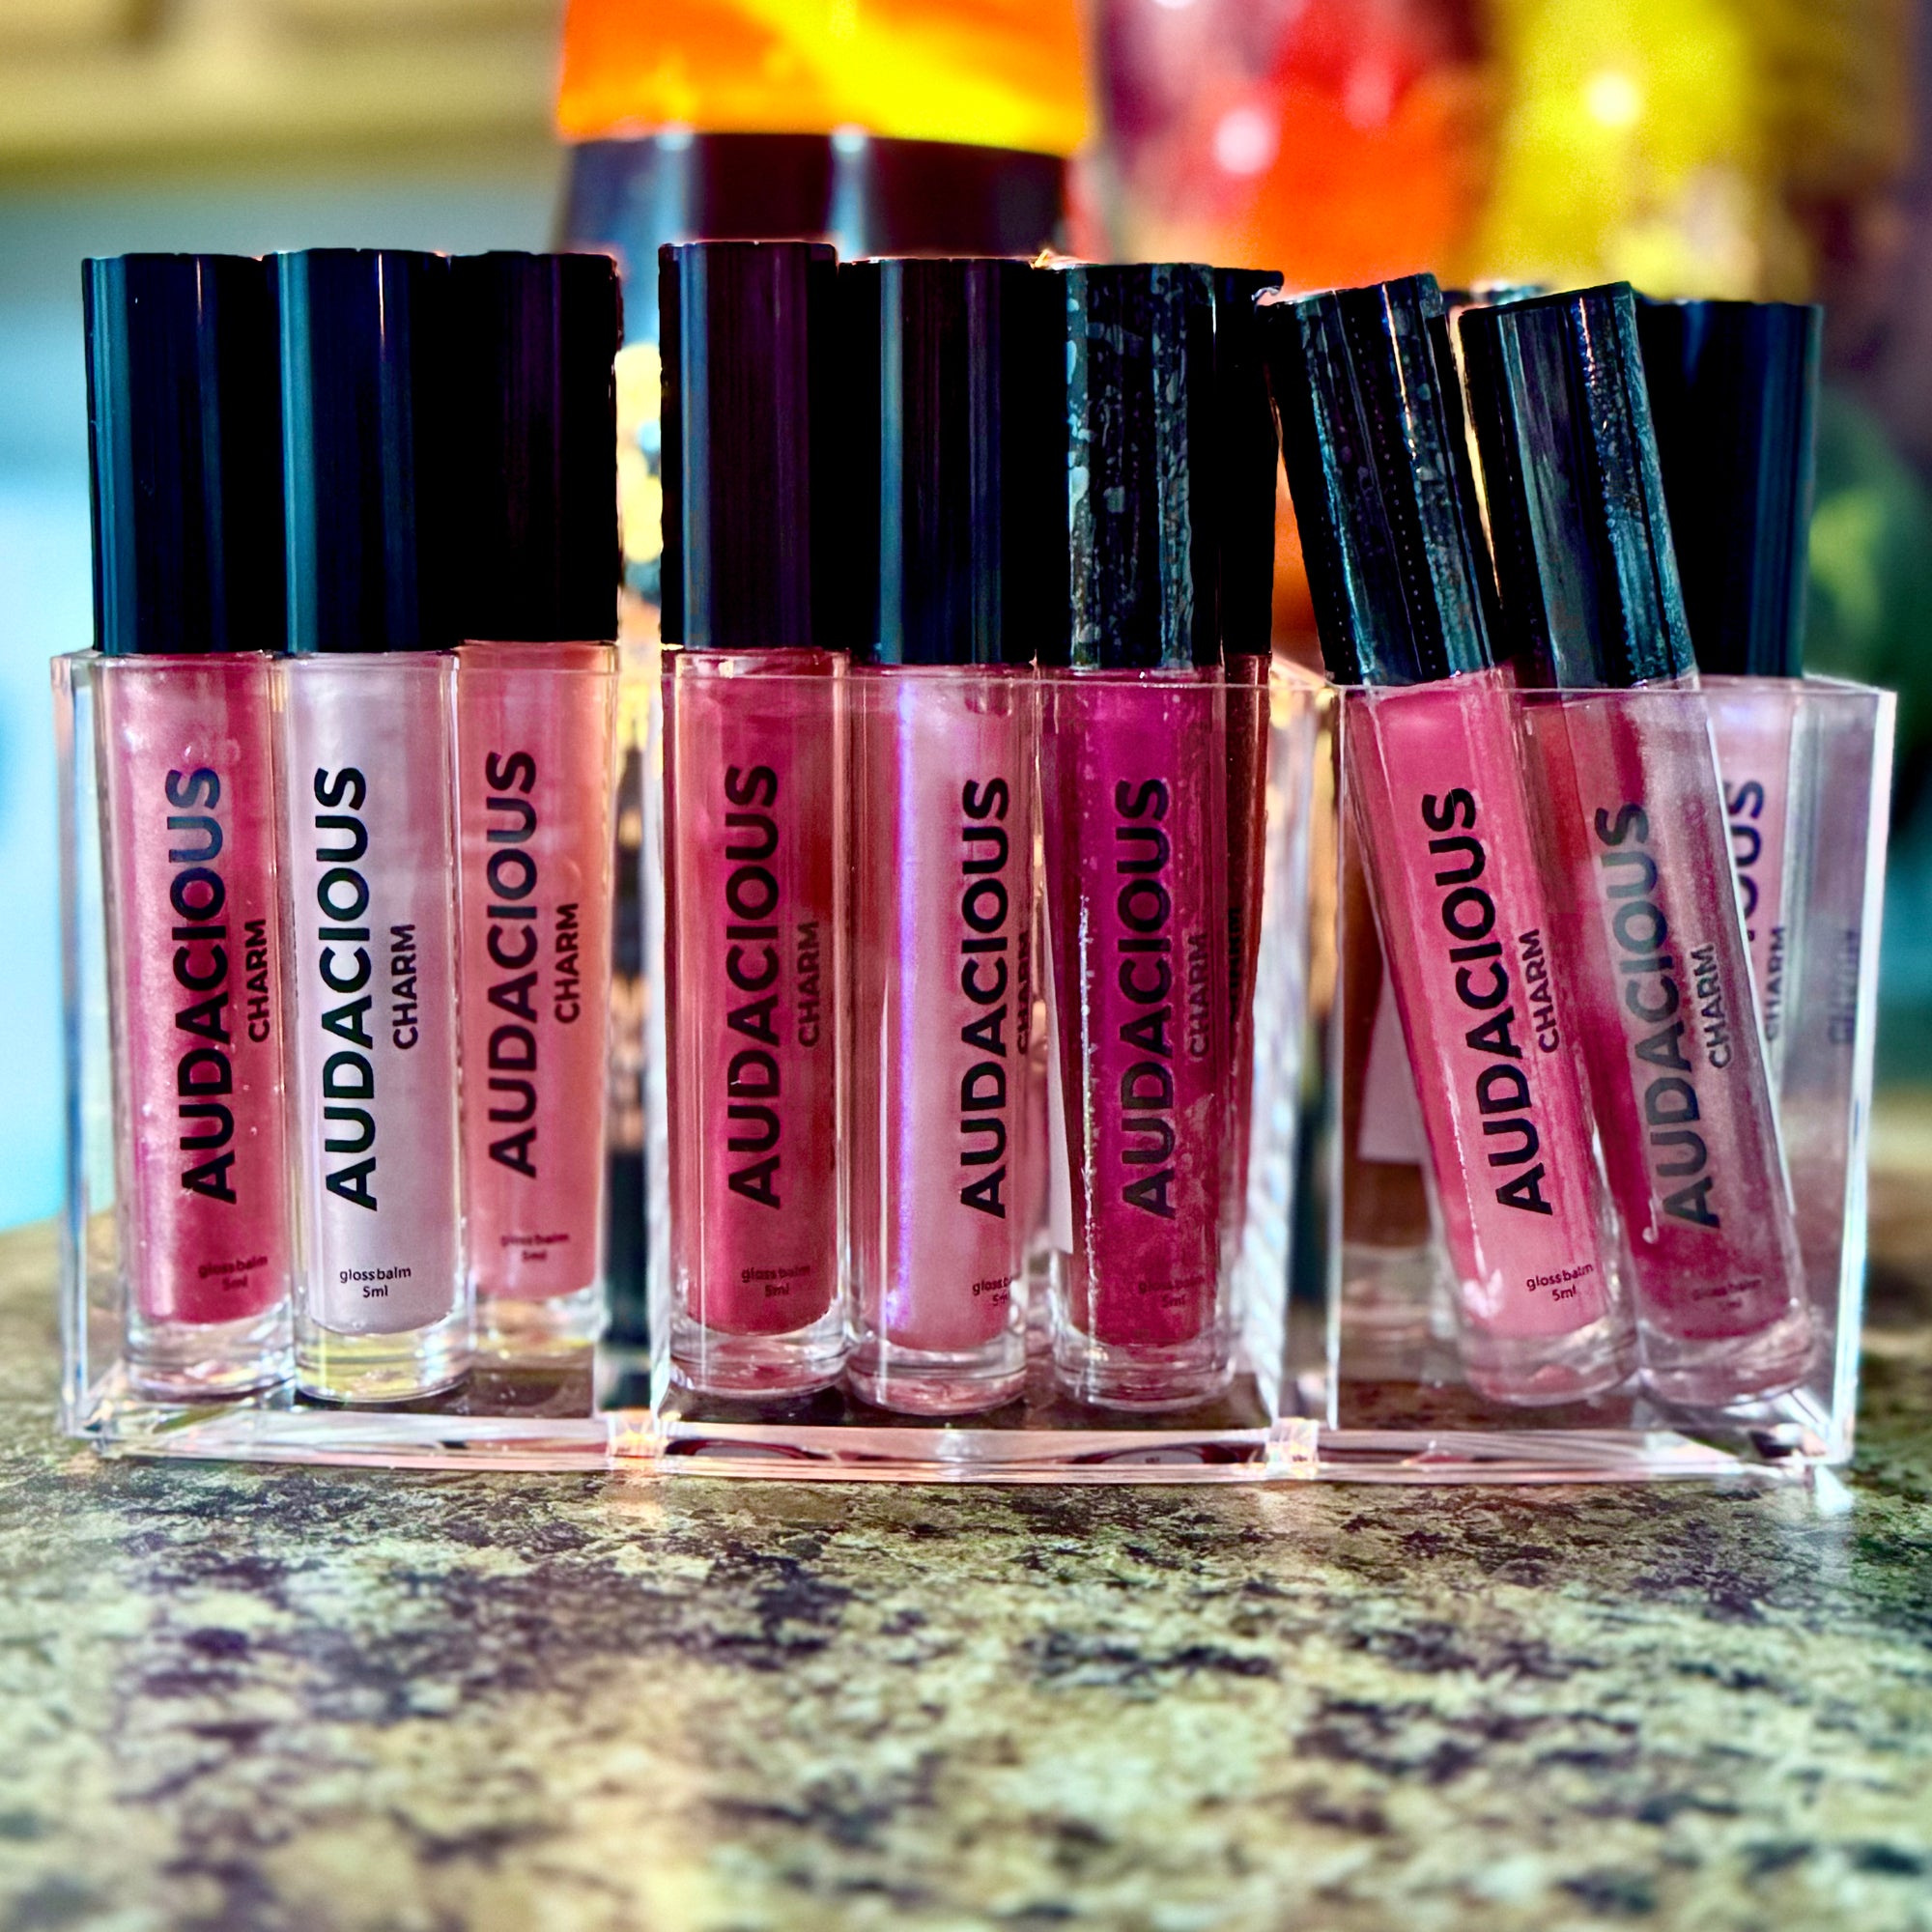 Audacious Charm - Pink Lip Gloss | Pre-Filled & Branded - Made By Valencia 